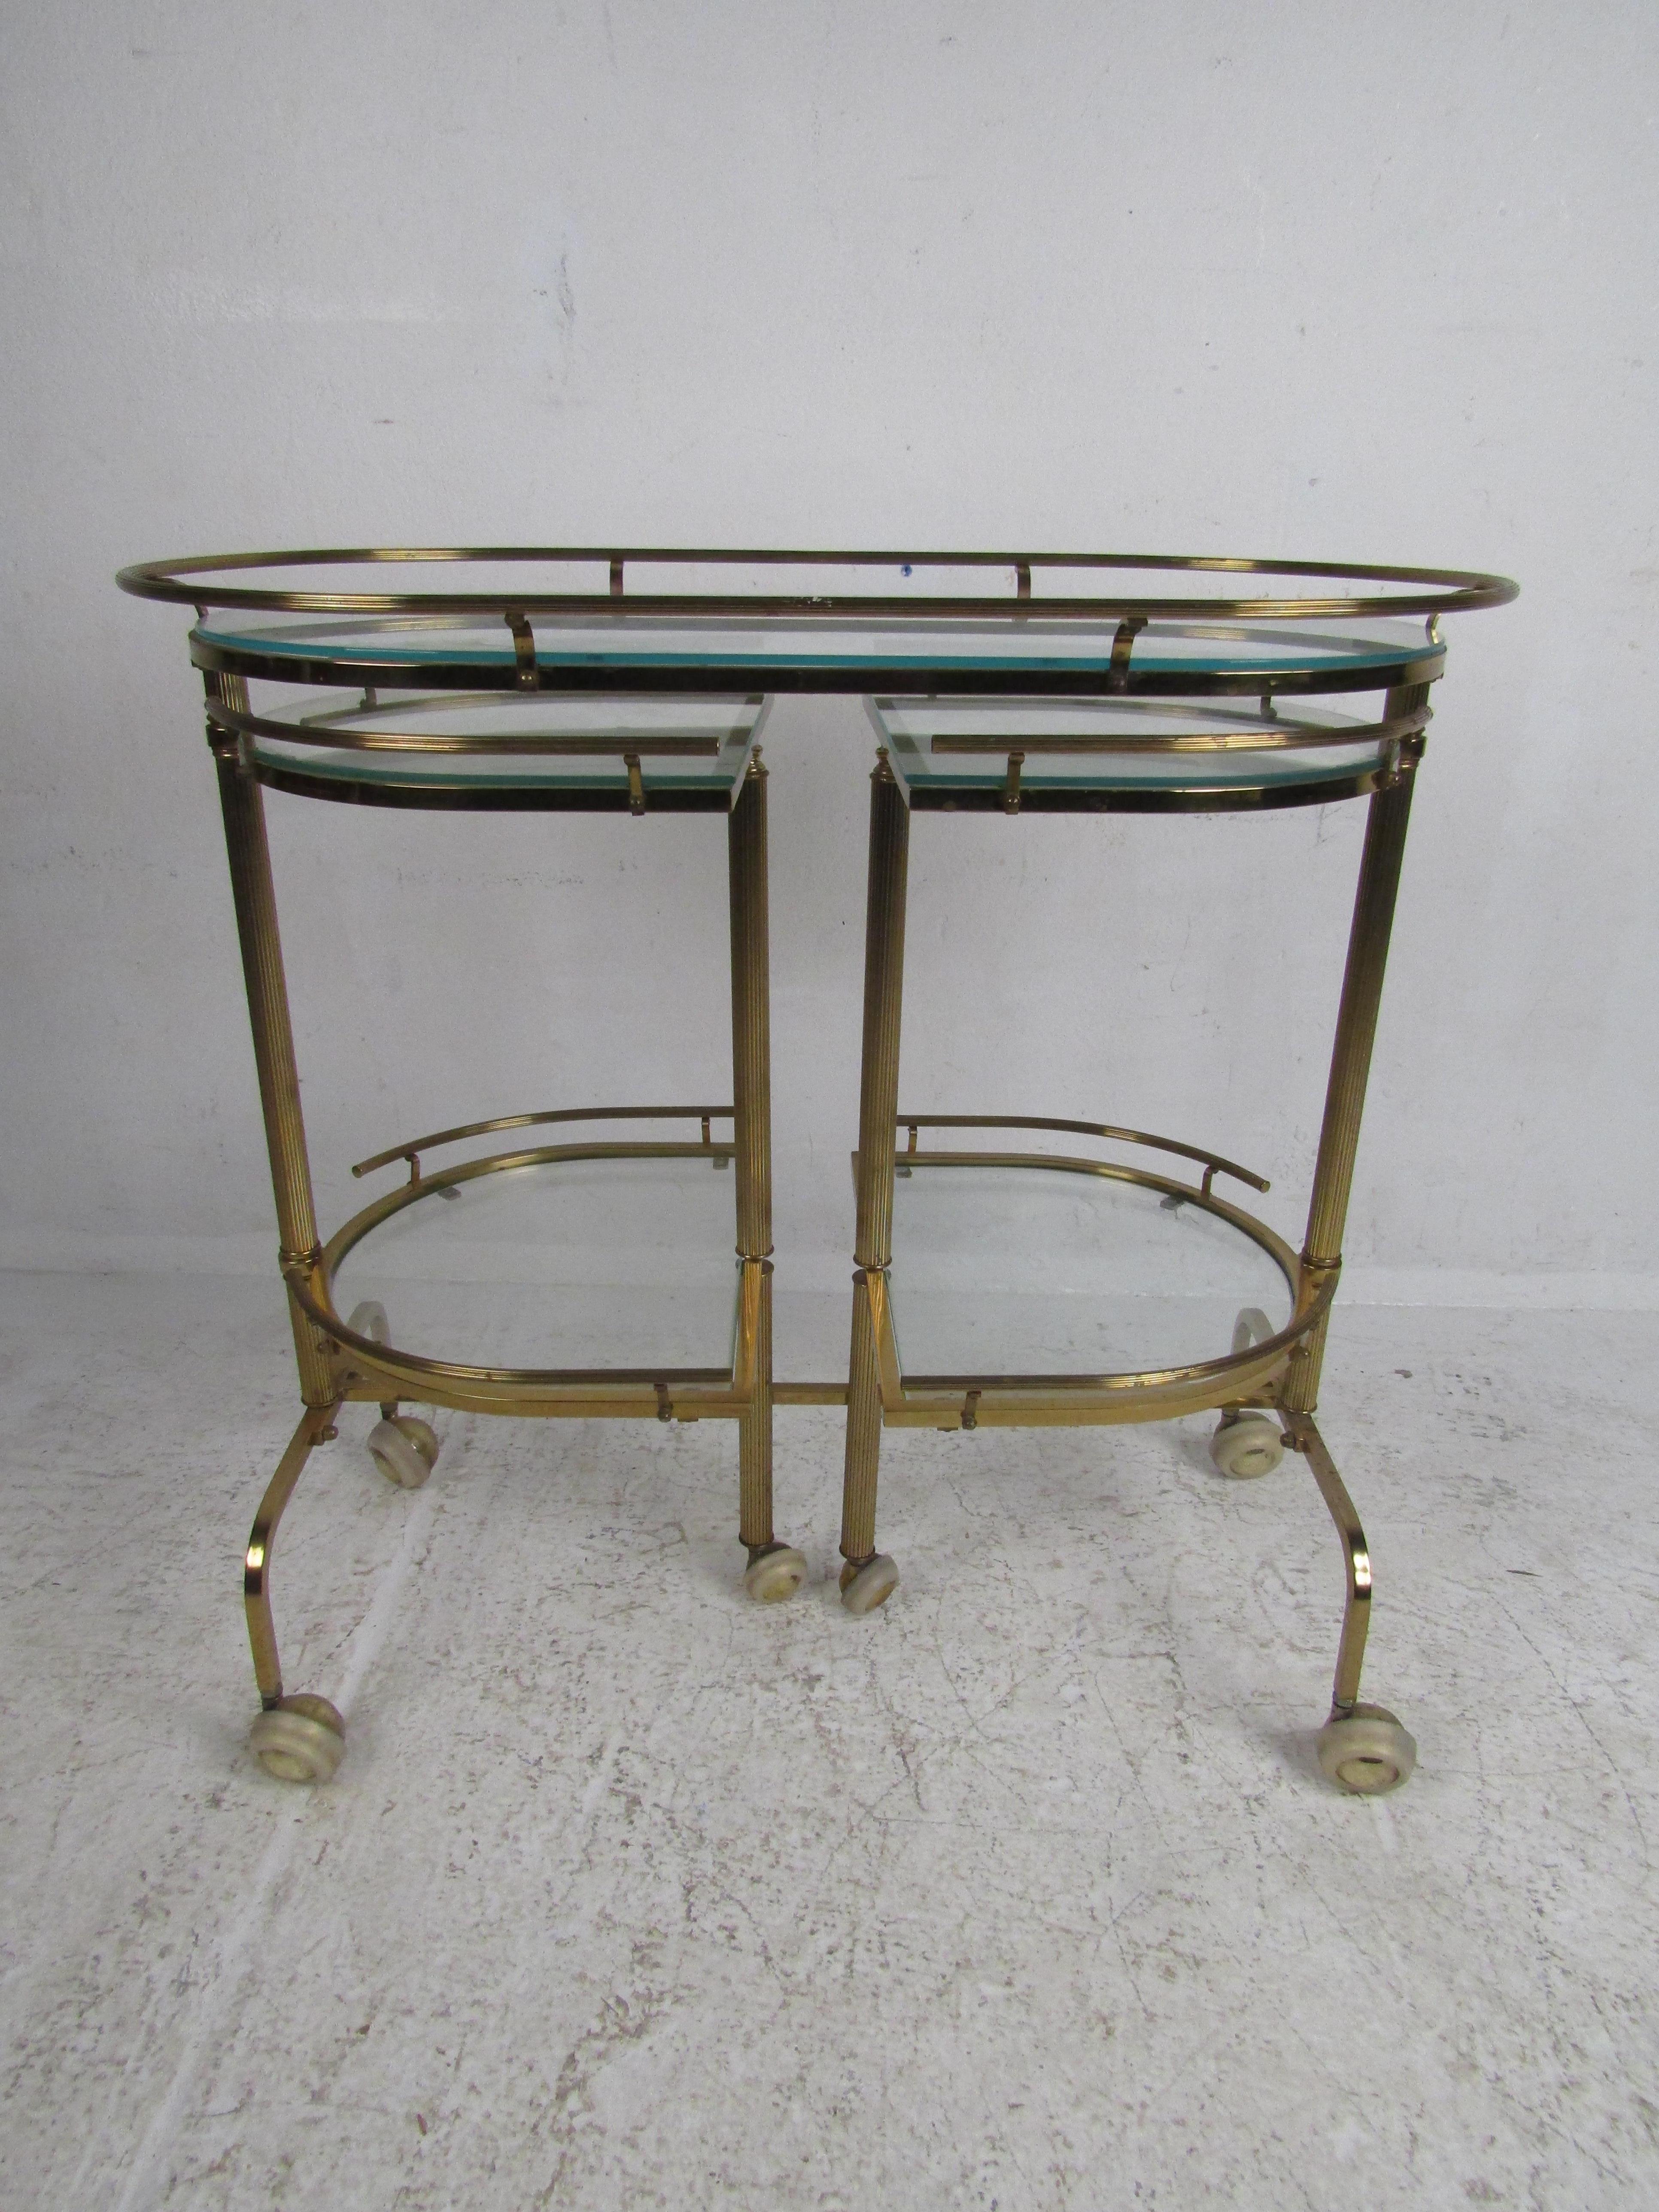 This truly unique three-tier glass top swivel bar cart features an eye-catching brass frame on rolling casters. Multi-tier swinging shelves make this a great piece to add to your home or office. When fully open it measures 55.5